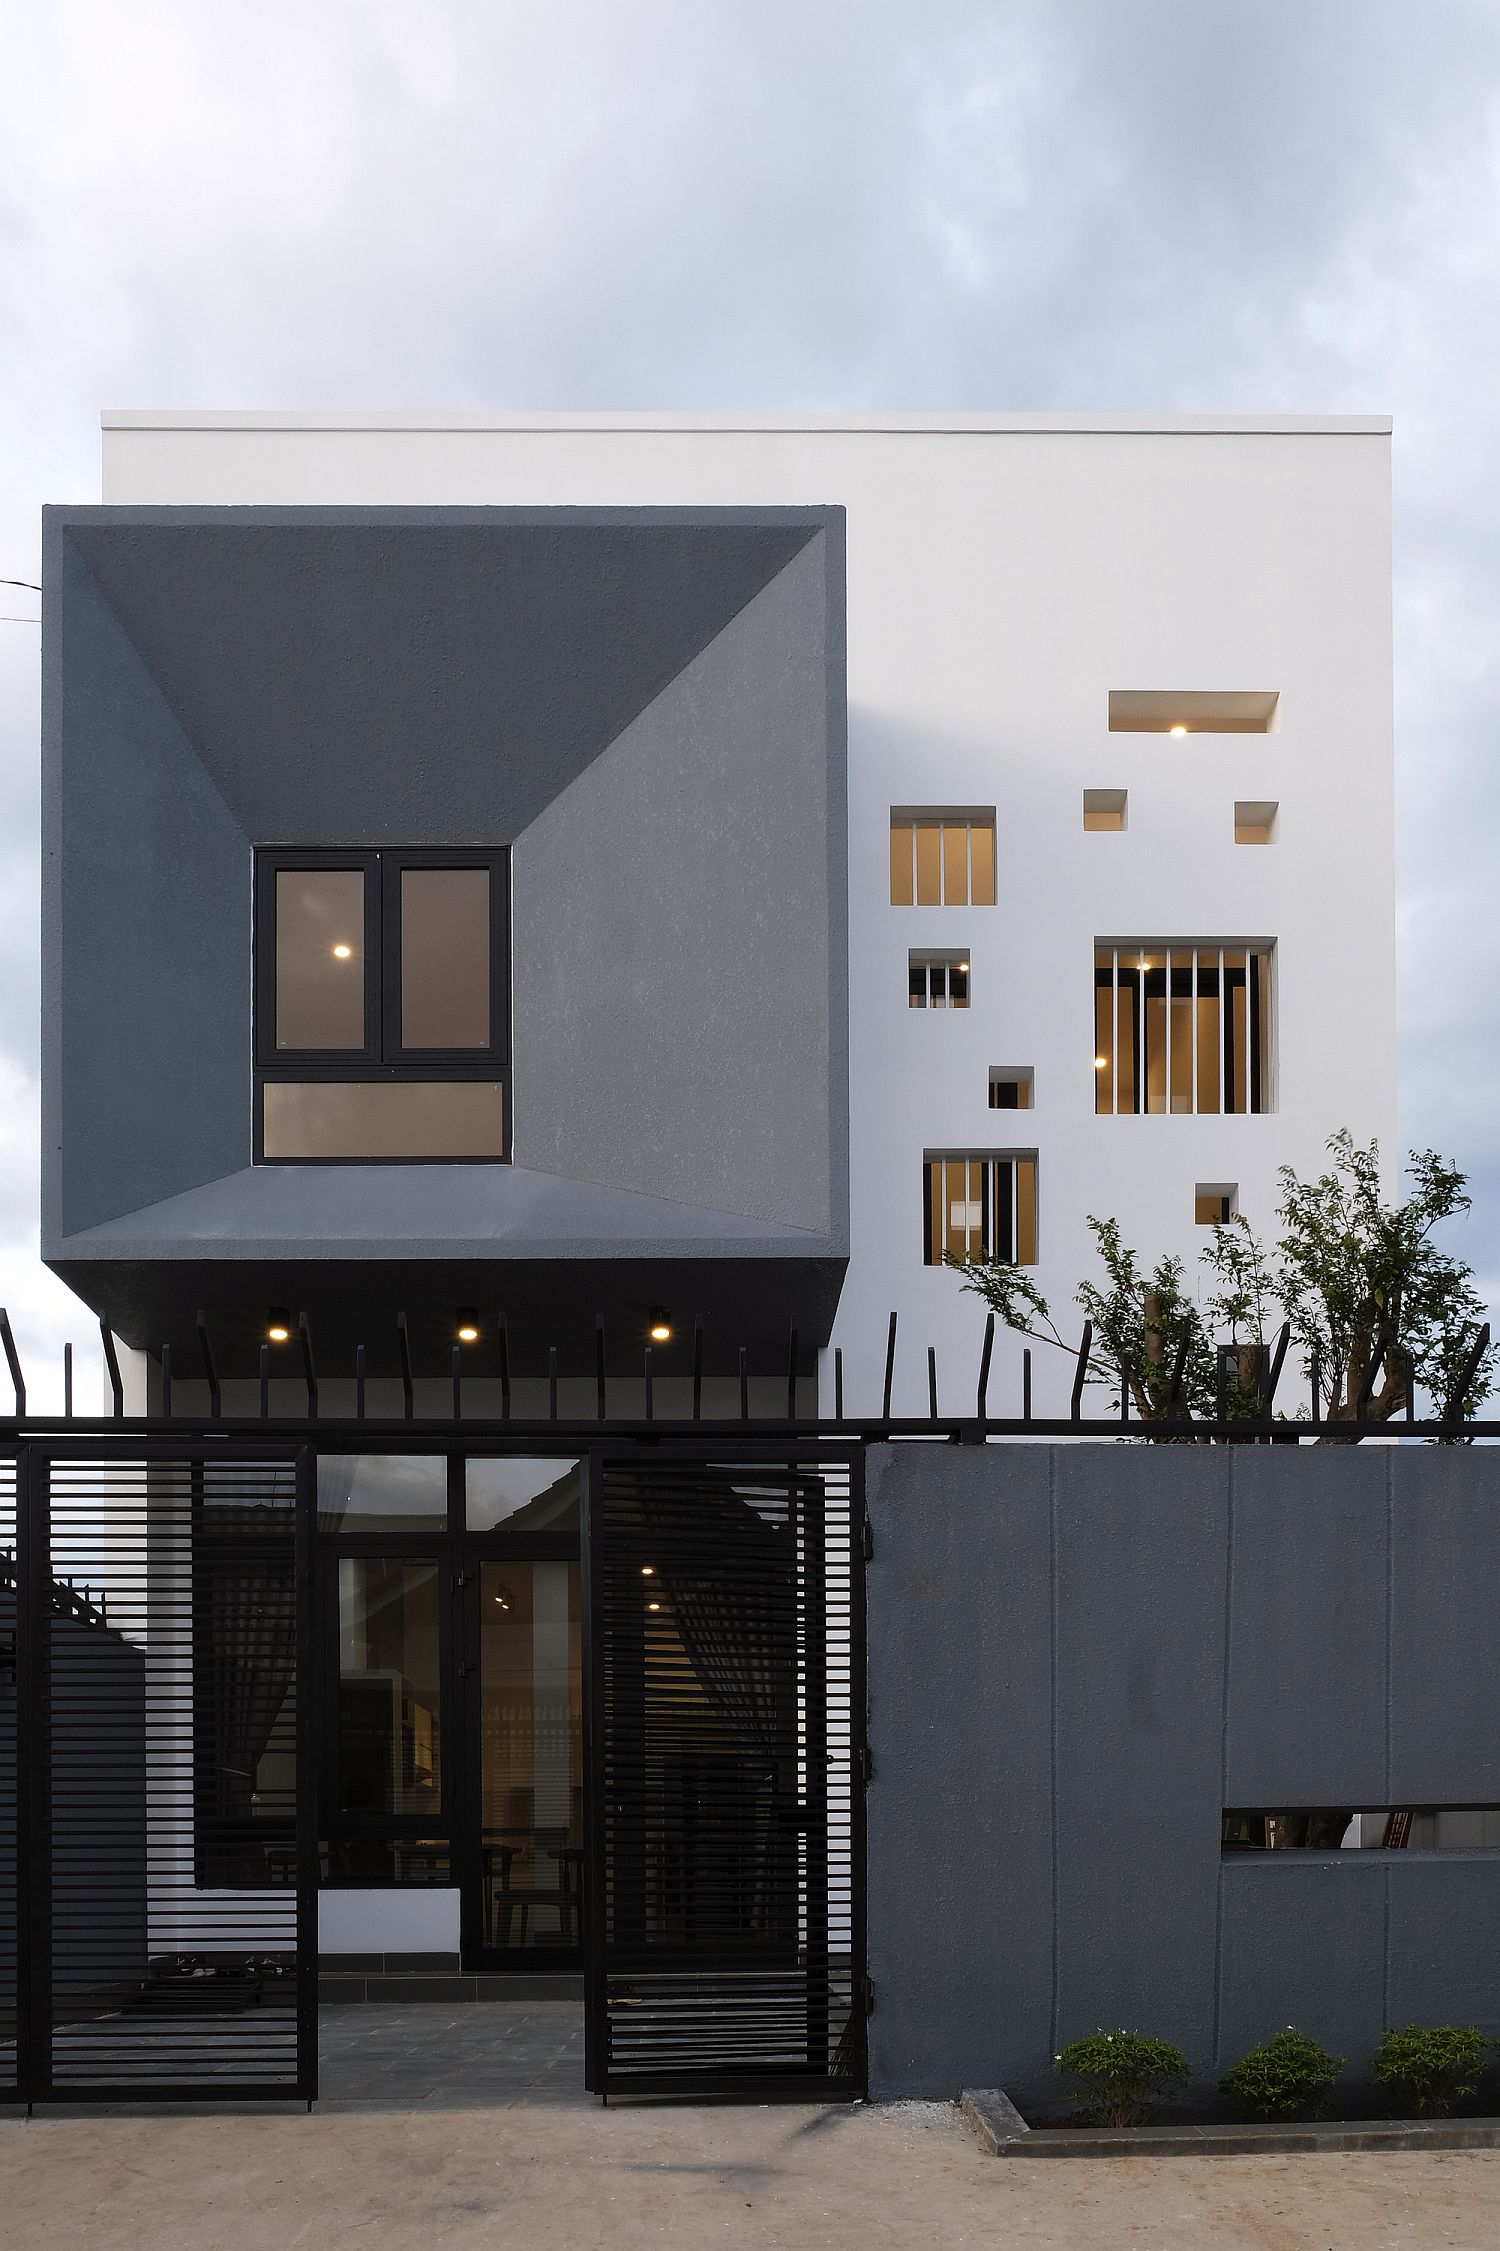 Street view of contemporary MHD House in Vietnam